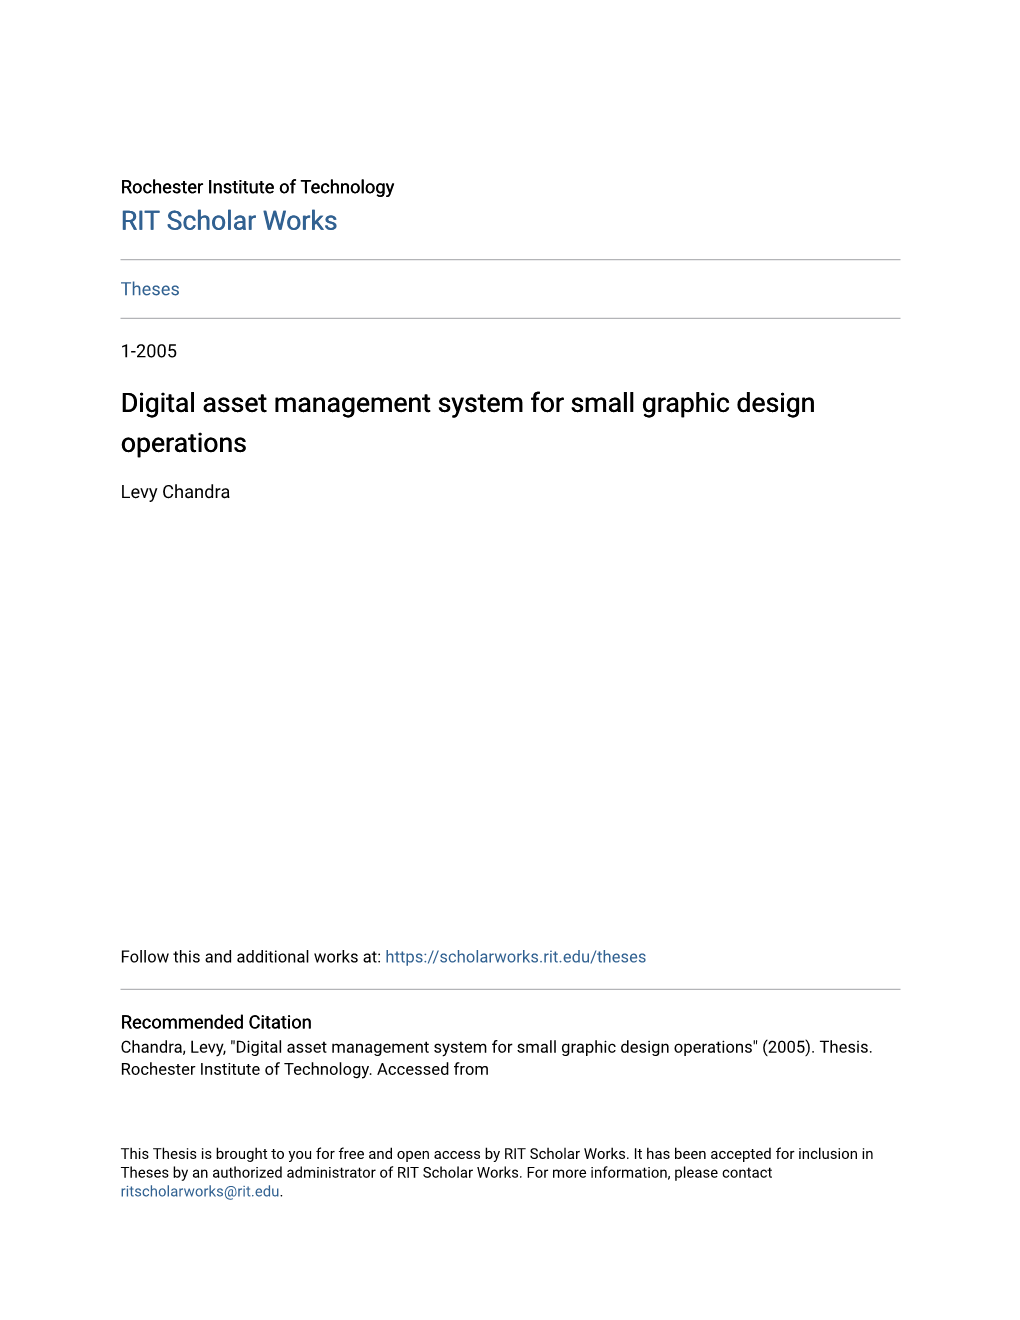 Digital Asset Management System for Small Graphic Design Operations